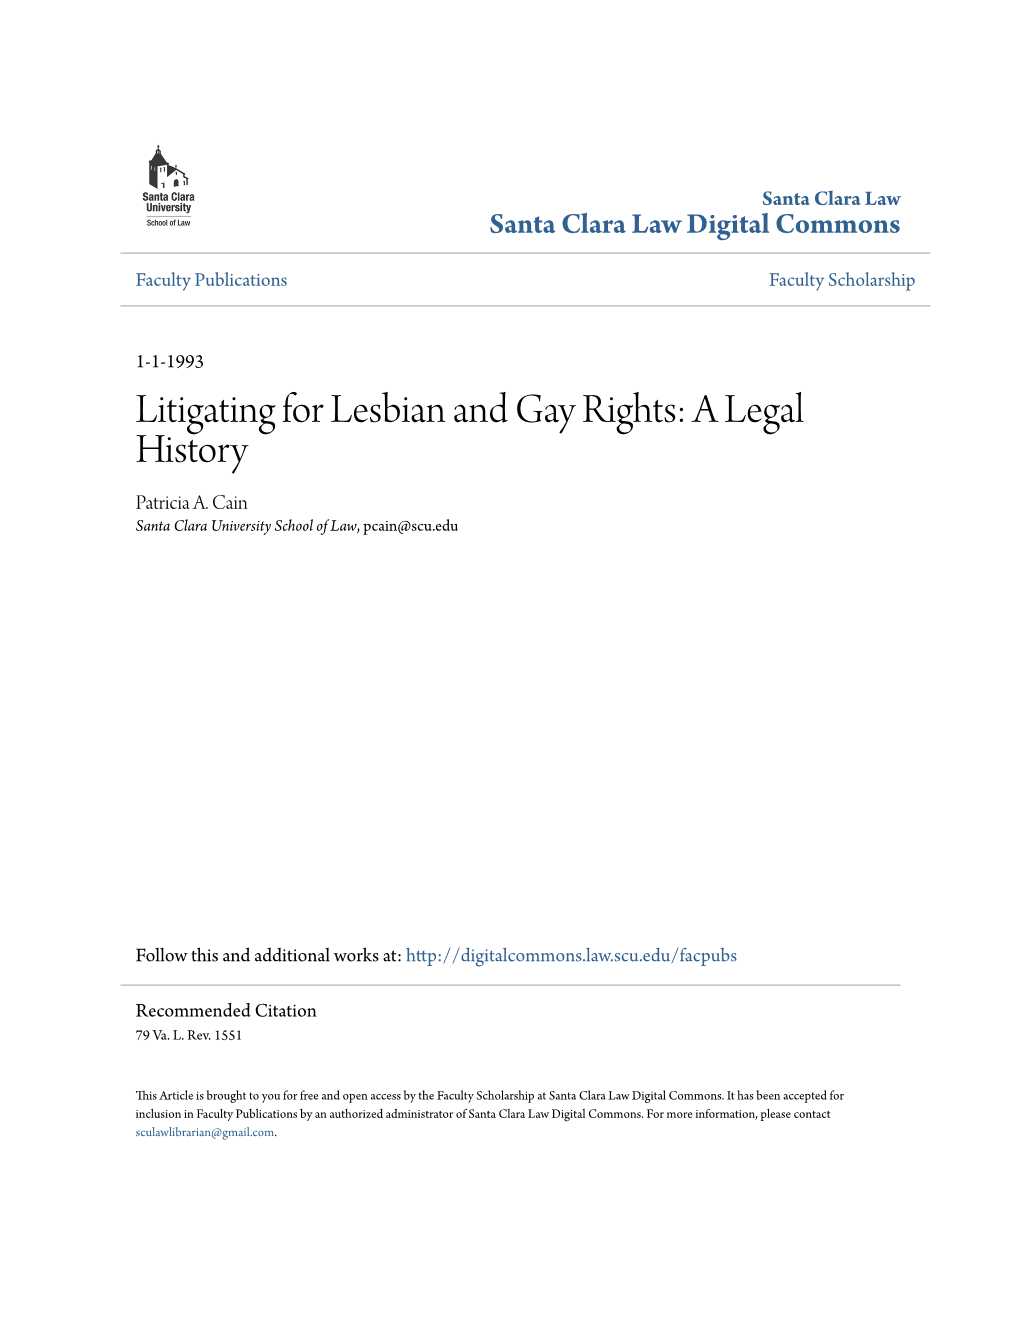 Litigating for Lesbian and Gay Rights: a Legal History Patricia A